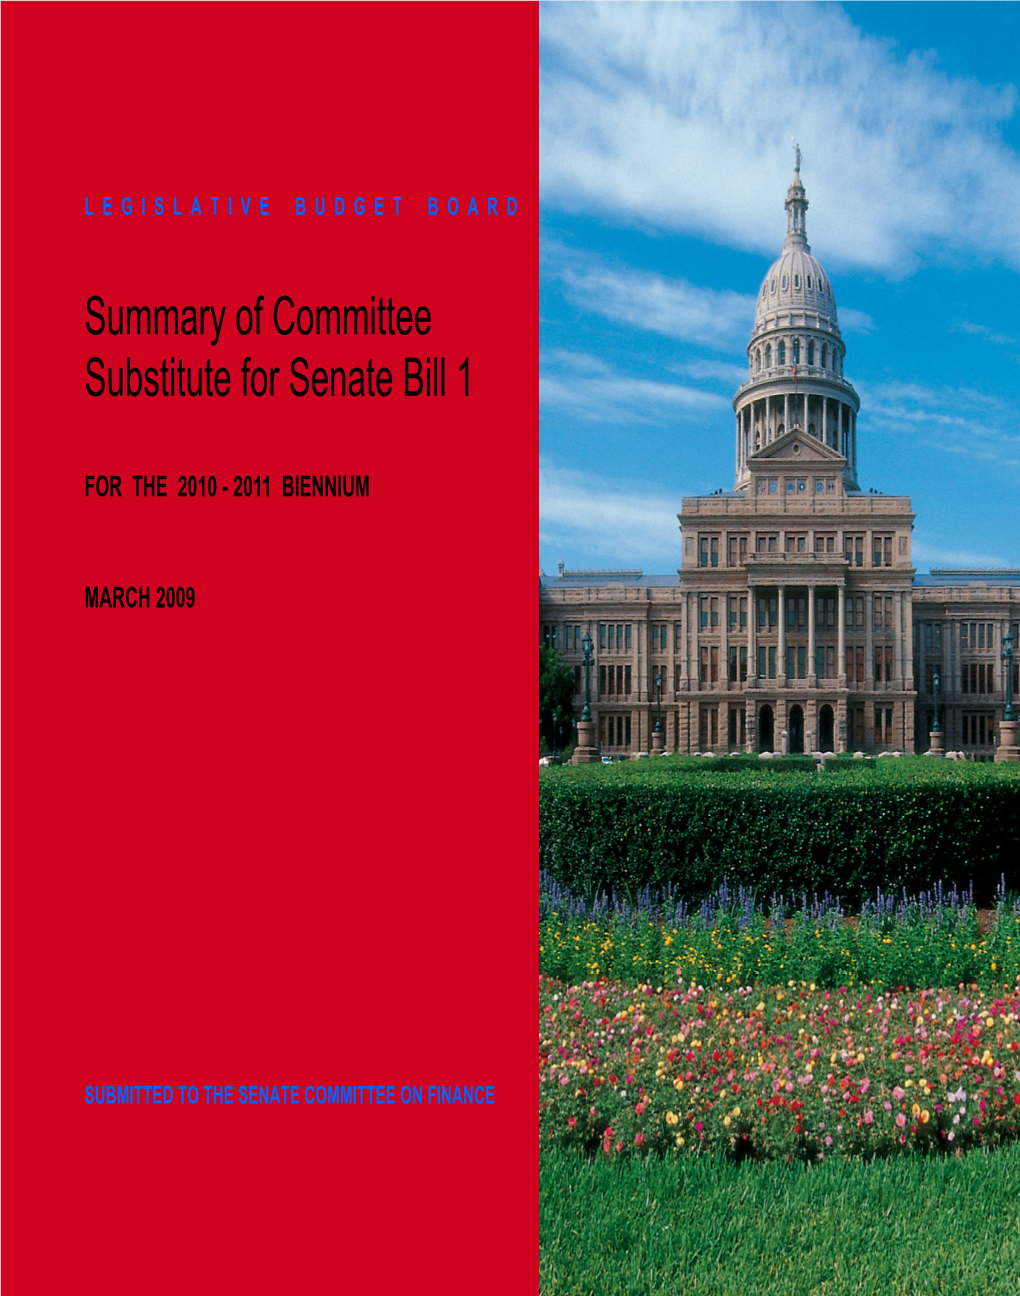 Summary of Committee Substitute for Senate Bill 1